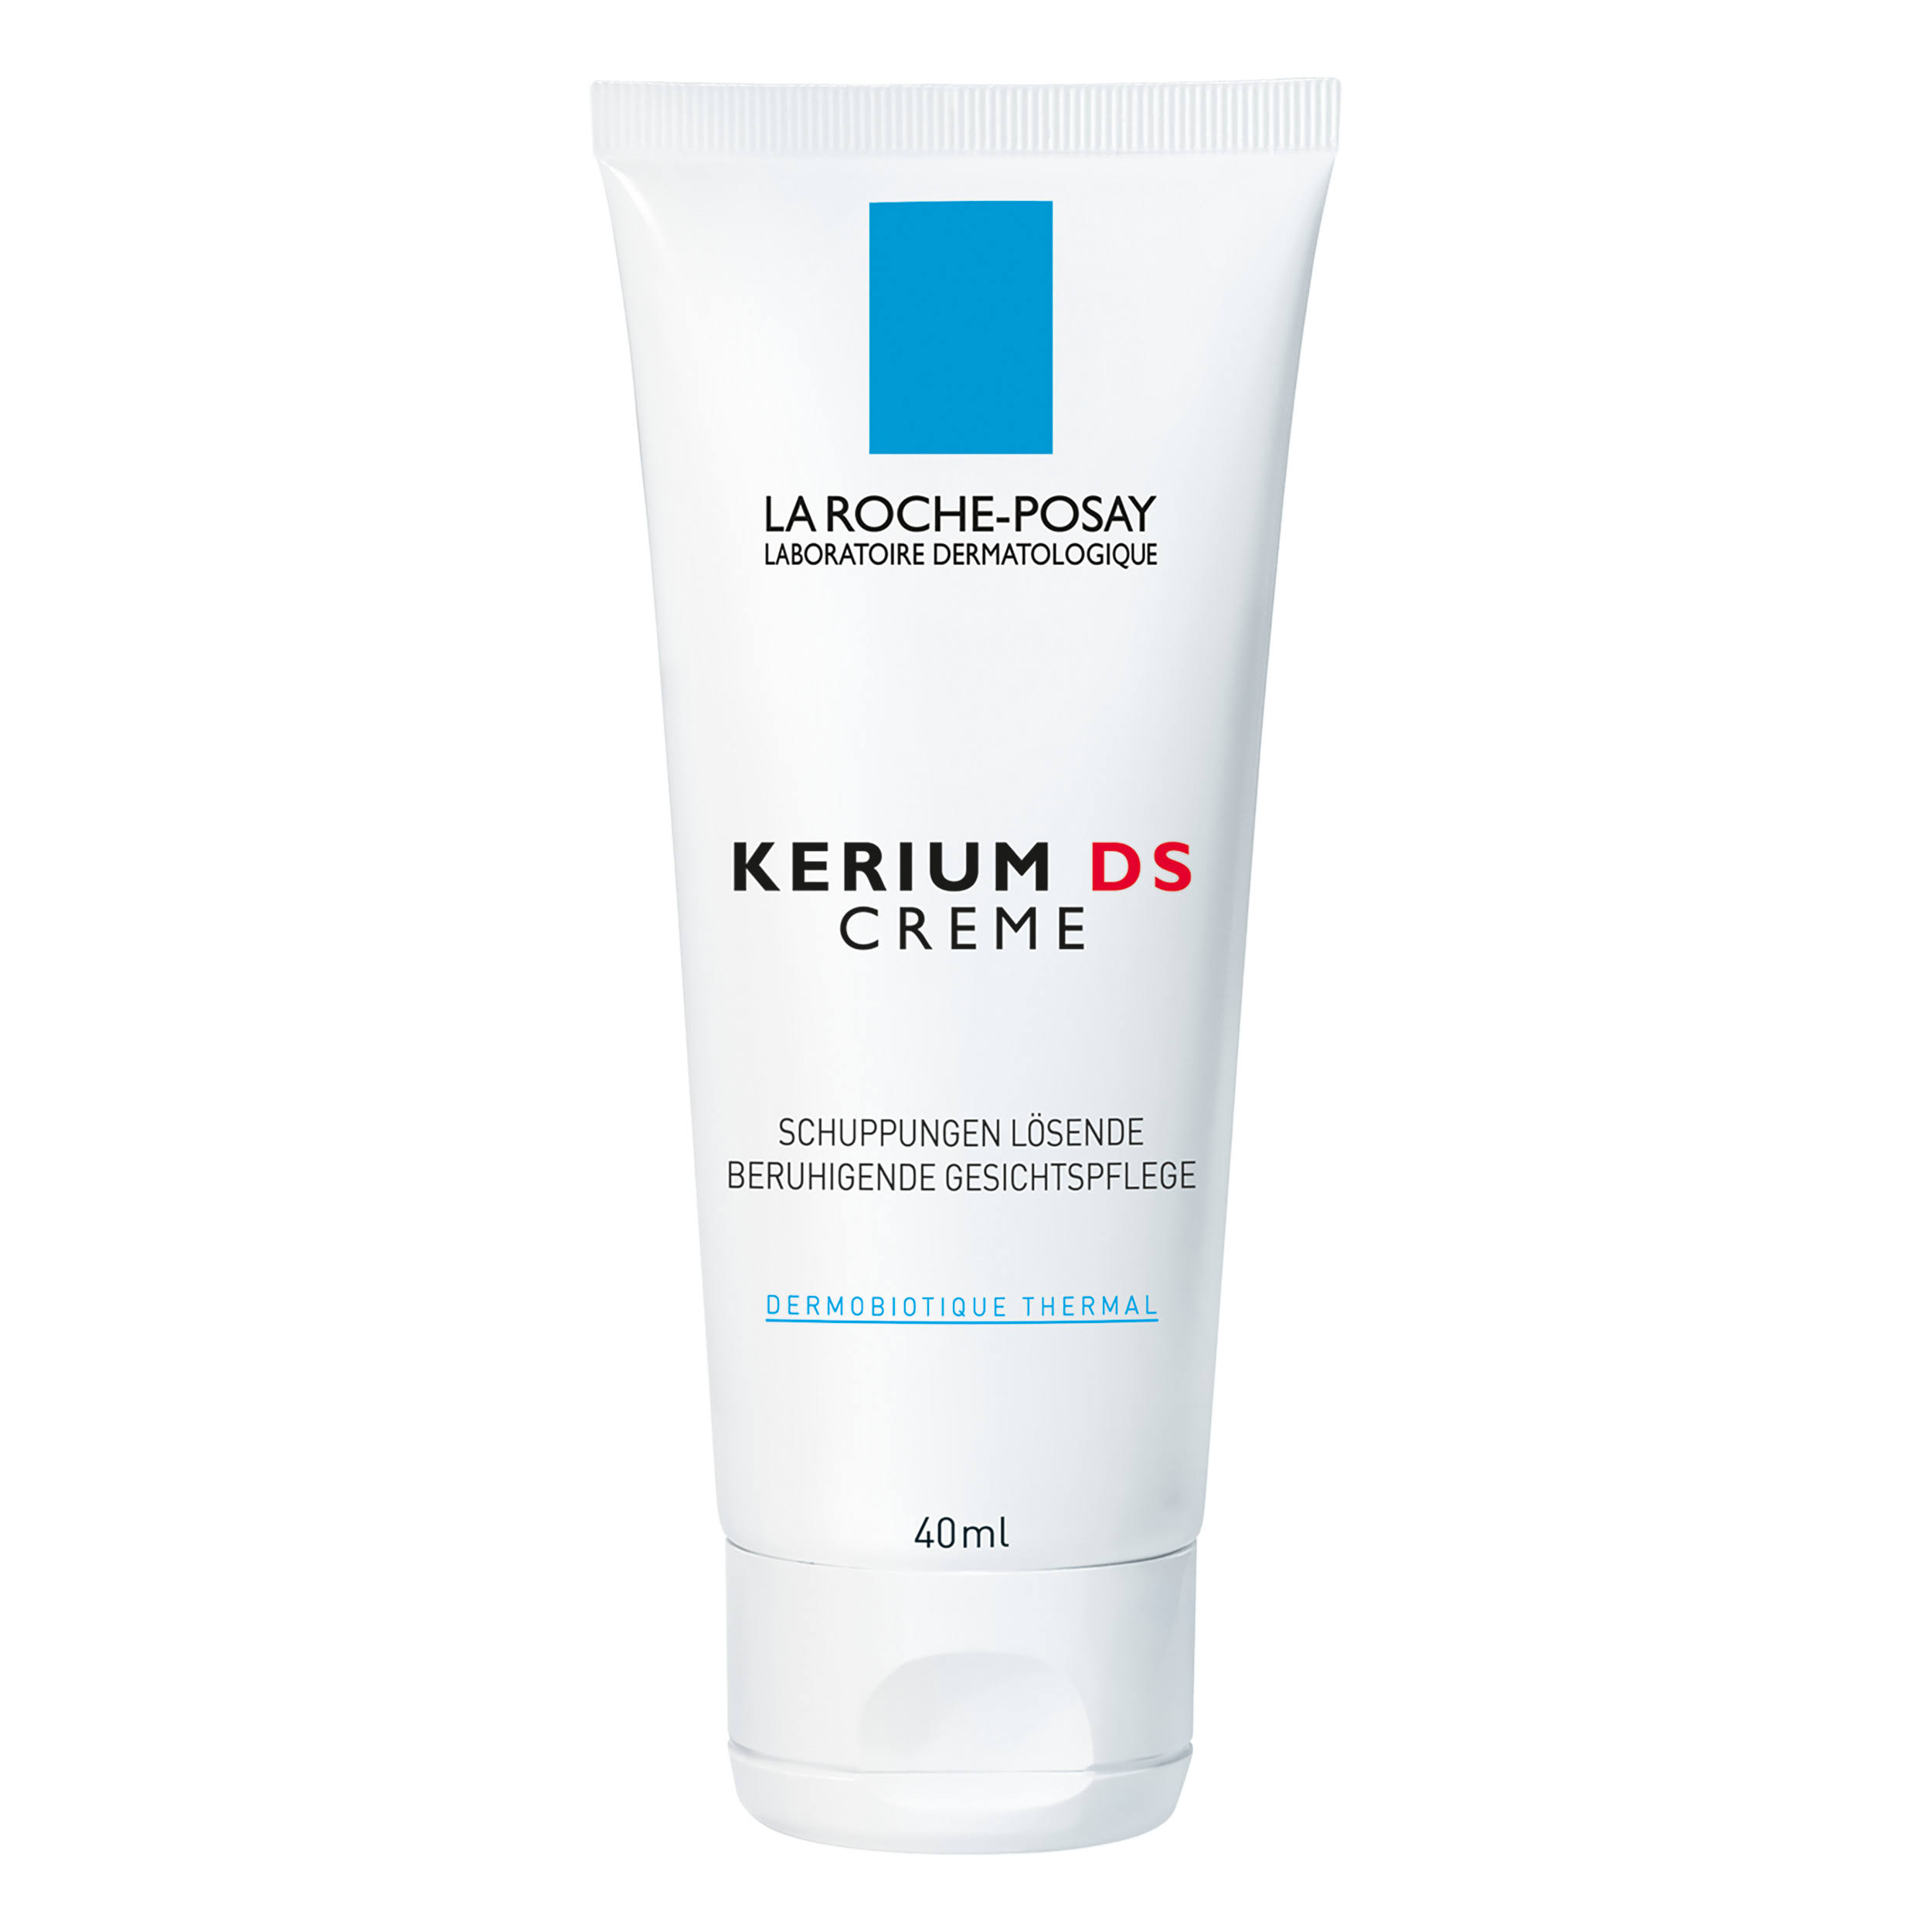 La Roche-Posay Kerium DS Creme Soothing Face Care - 40ml